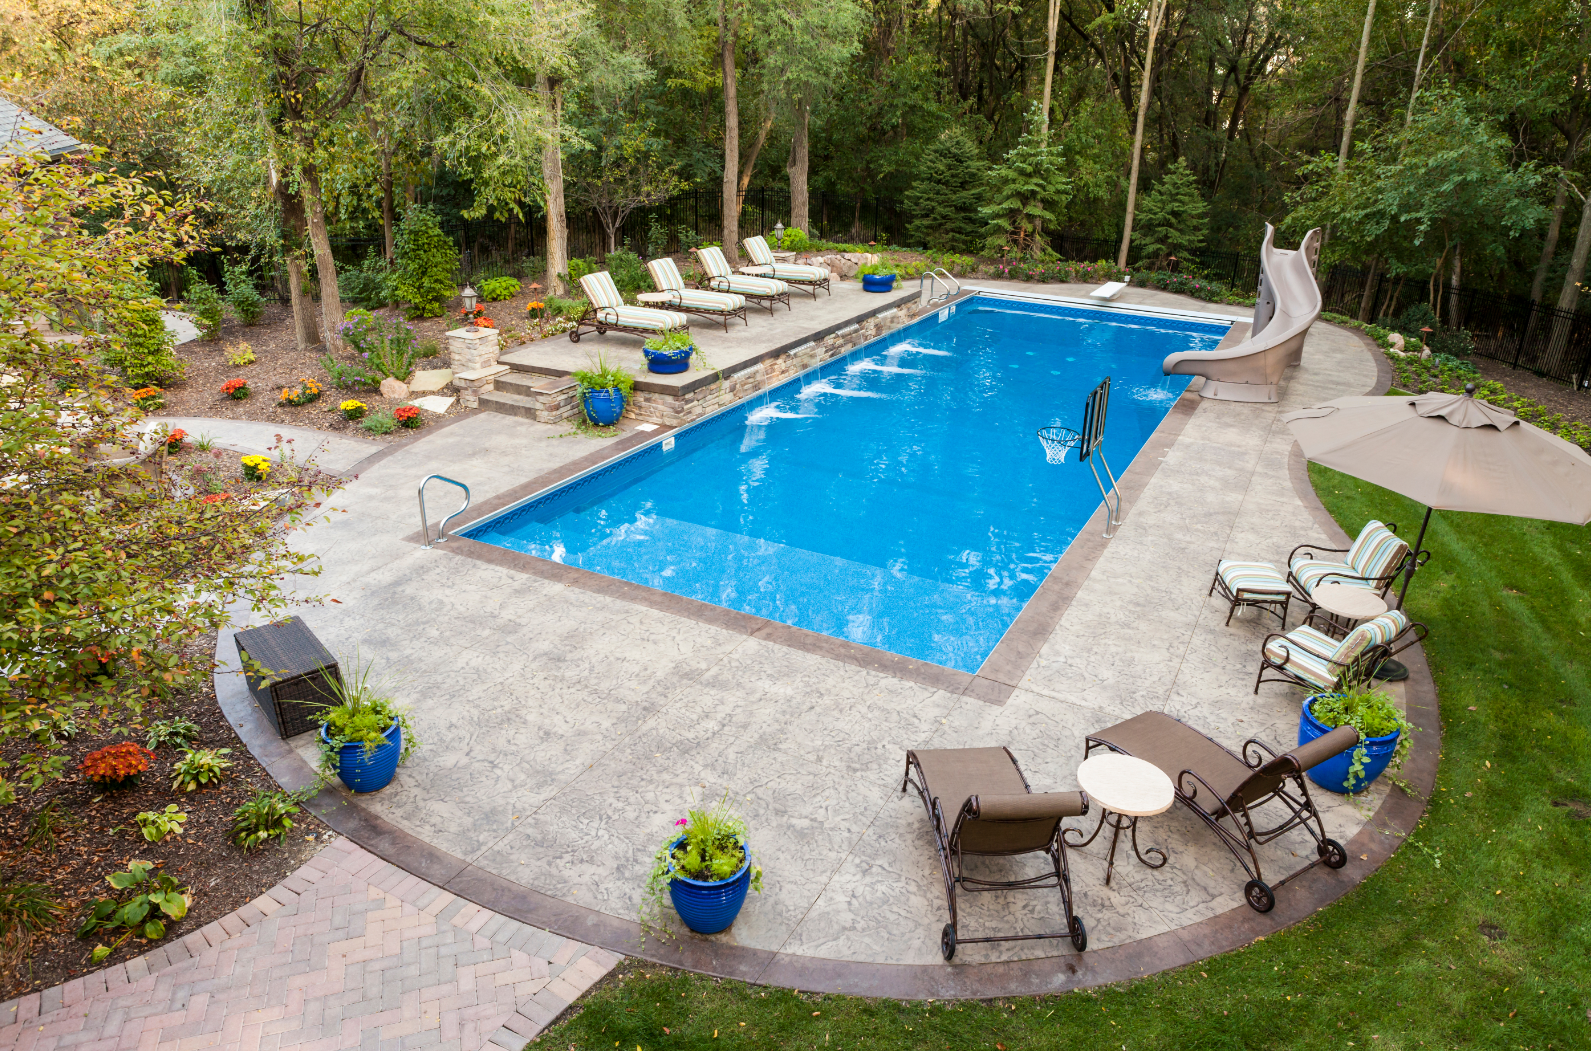 A backyard pool with a concrete deck surrounding it.  There a a number of lounge chairs and a slide.